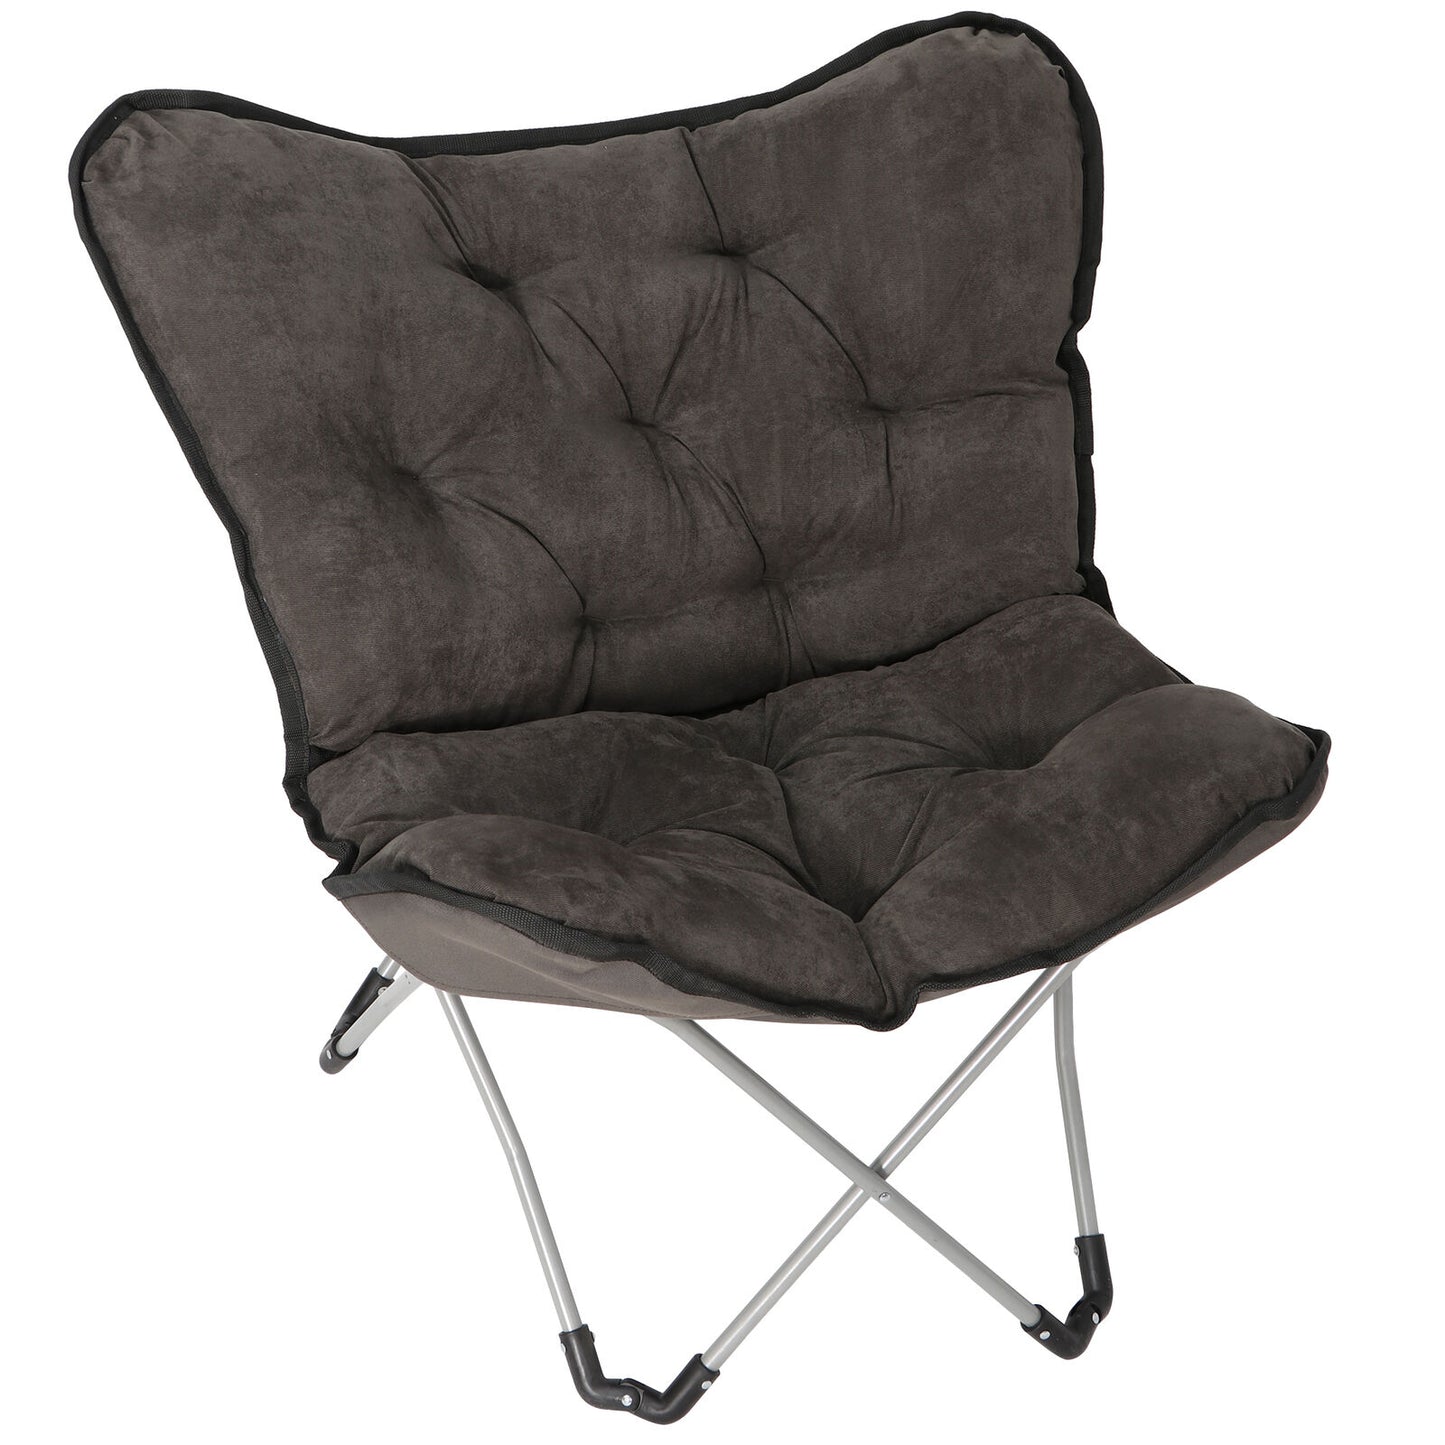 Foldable Butterfly Chair Square Lounge Soft Seat Living Room Furniture Deep Grey